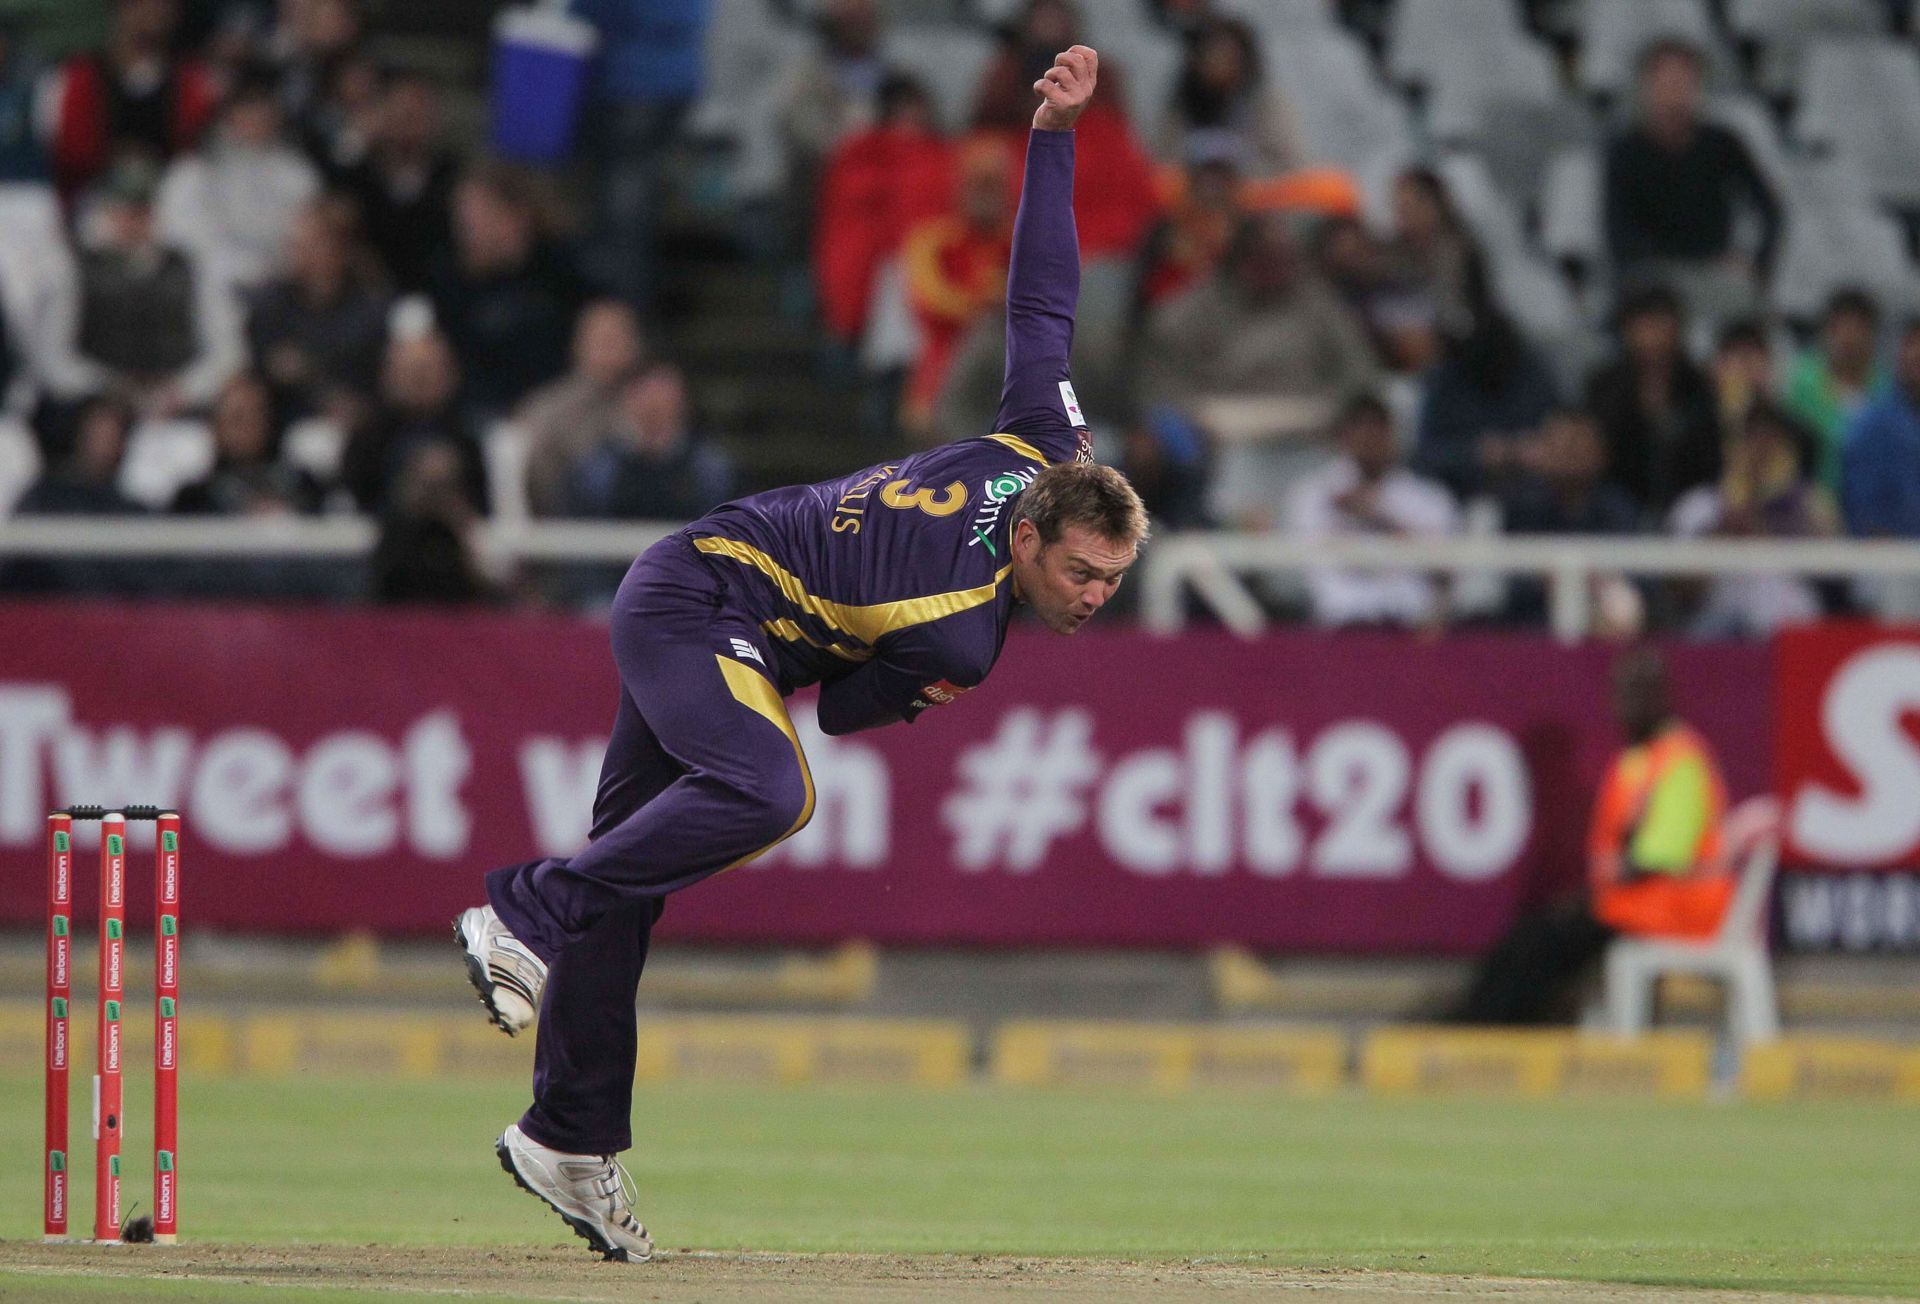 Jacques Kallis in action for Kolkata Knight Riders (Image Credit: Getty Images)